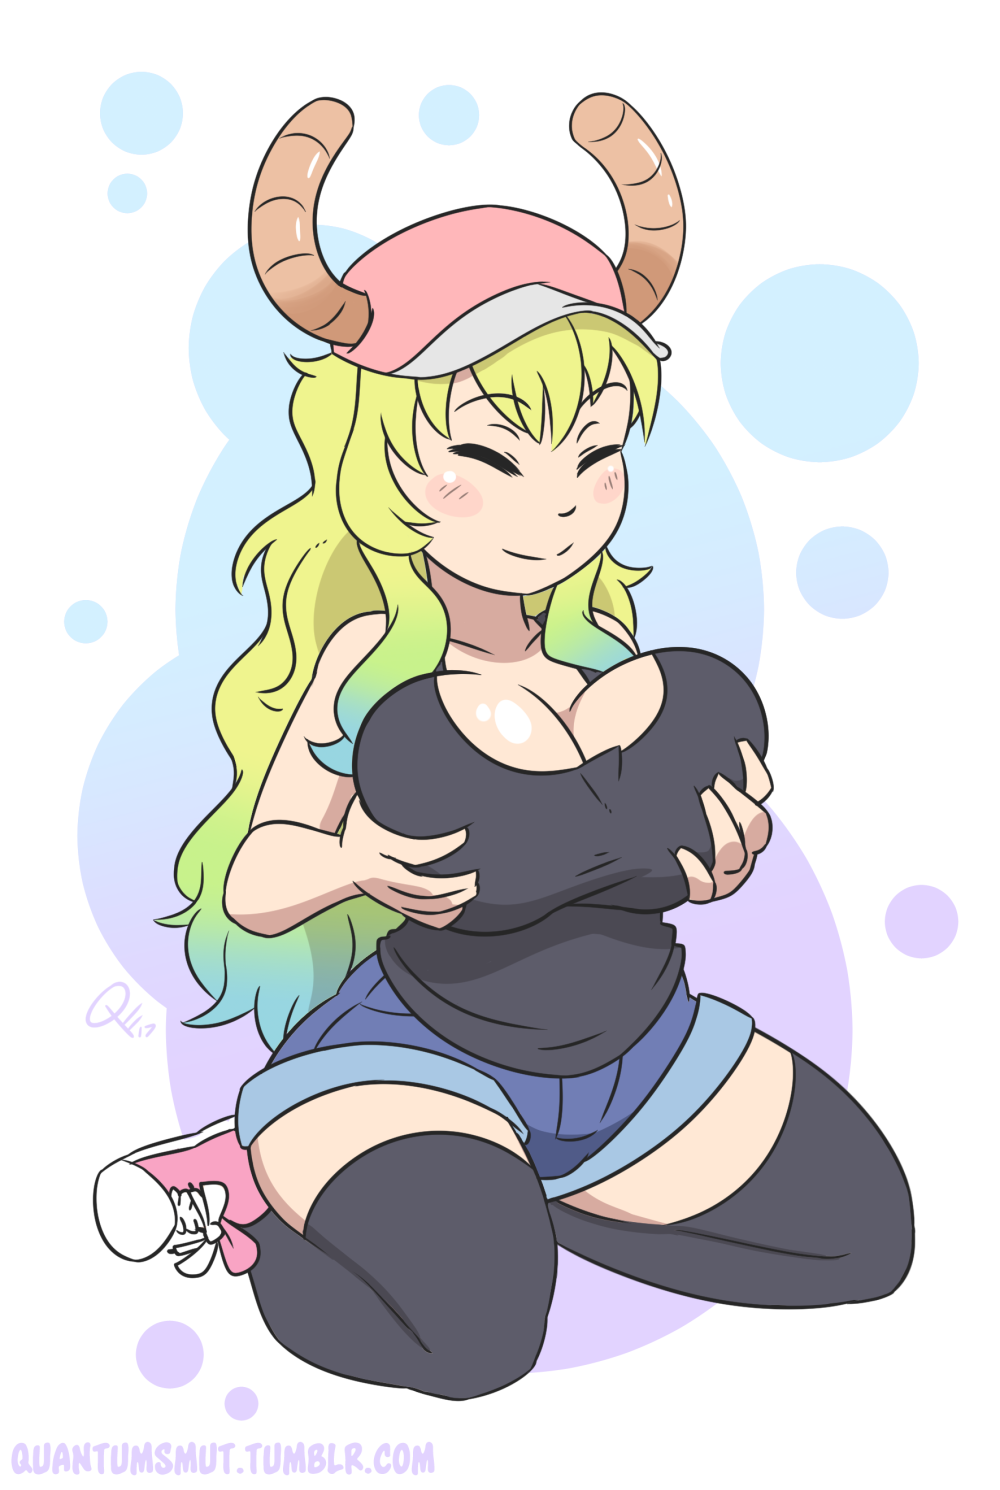 inkstash: quantumsmut:  Revisited the Lucoa drawing I did a while ago to add some